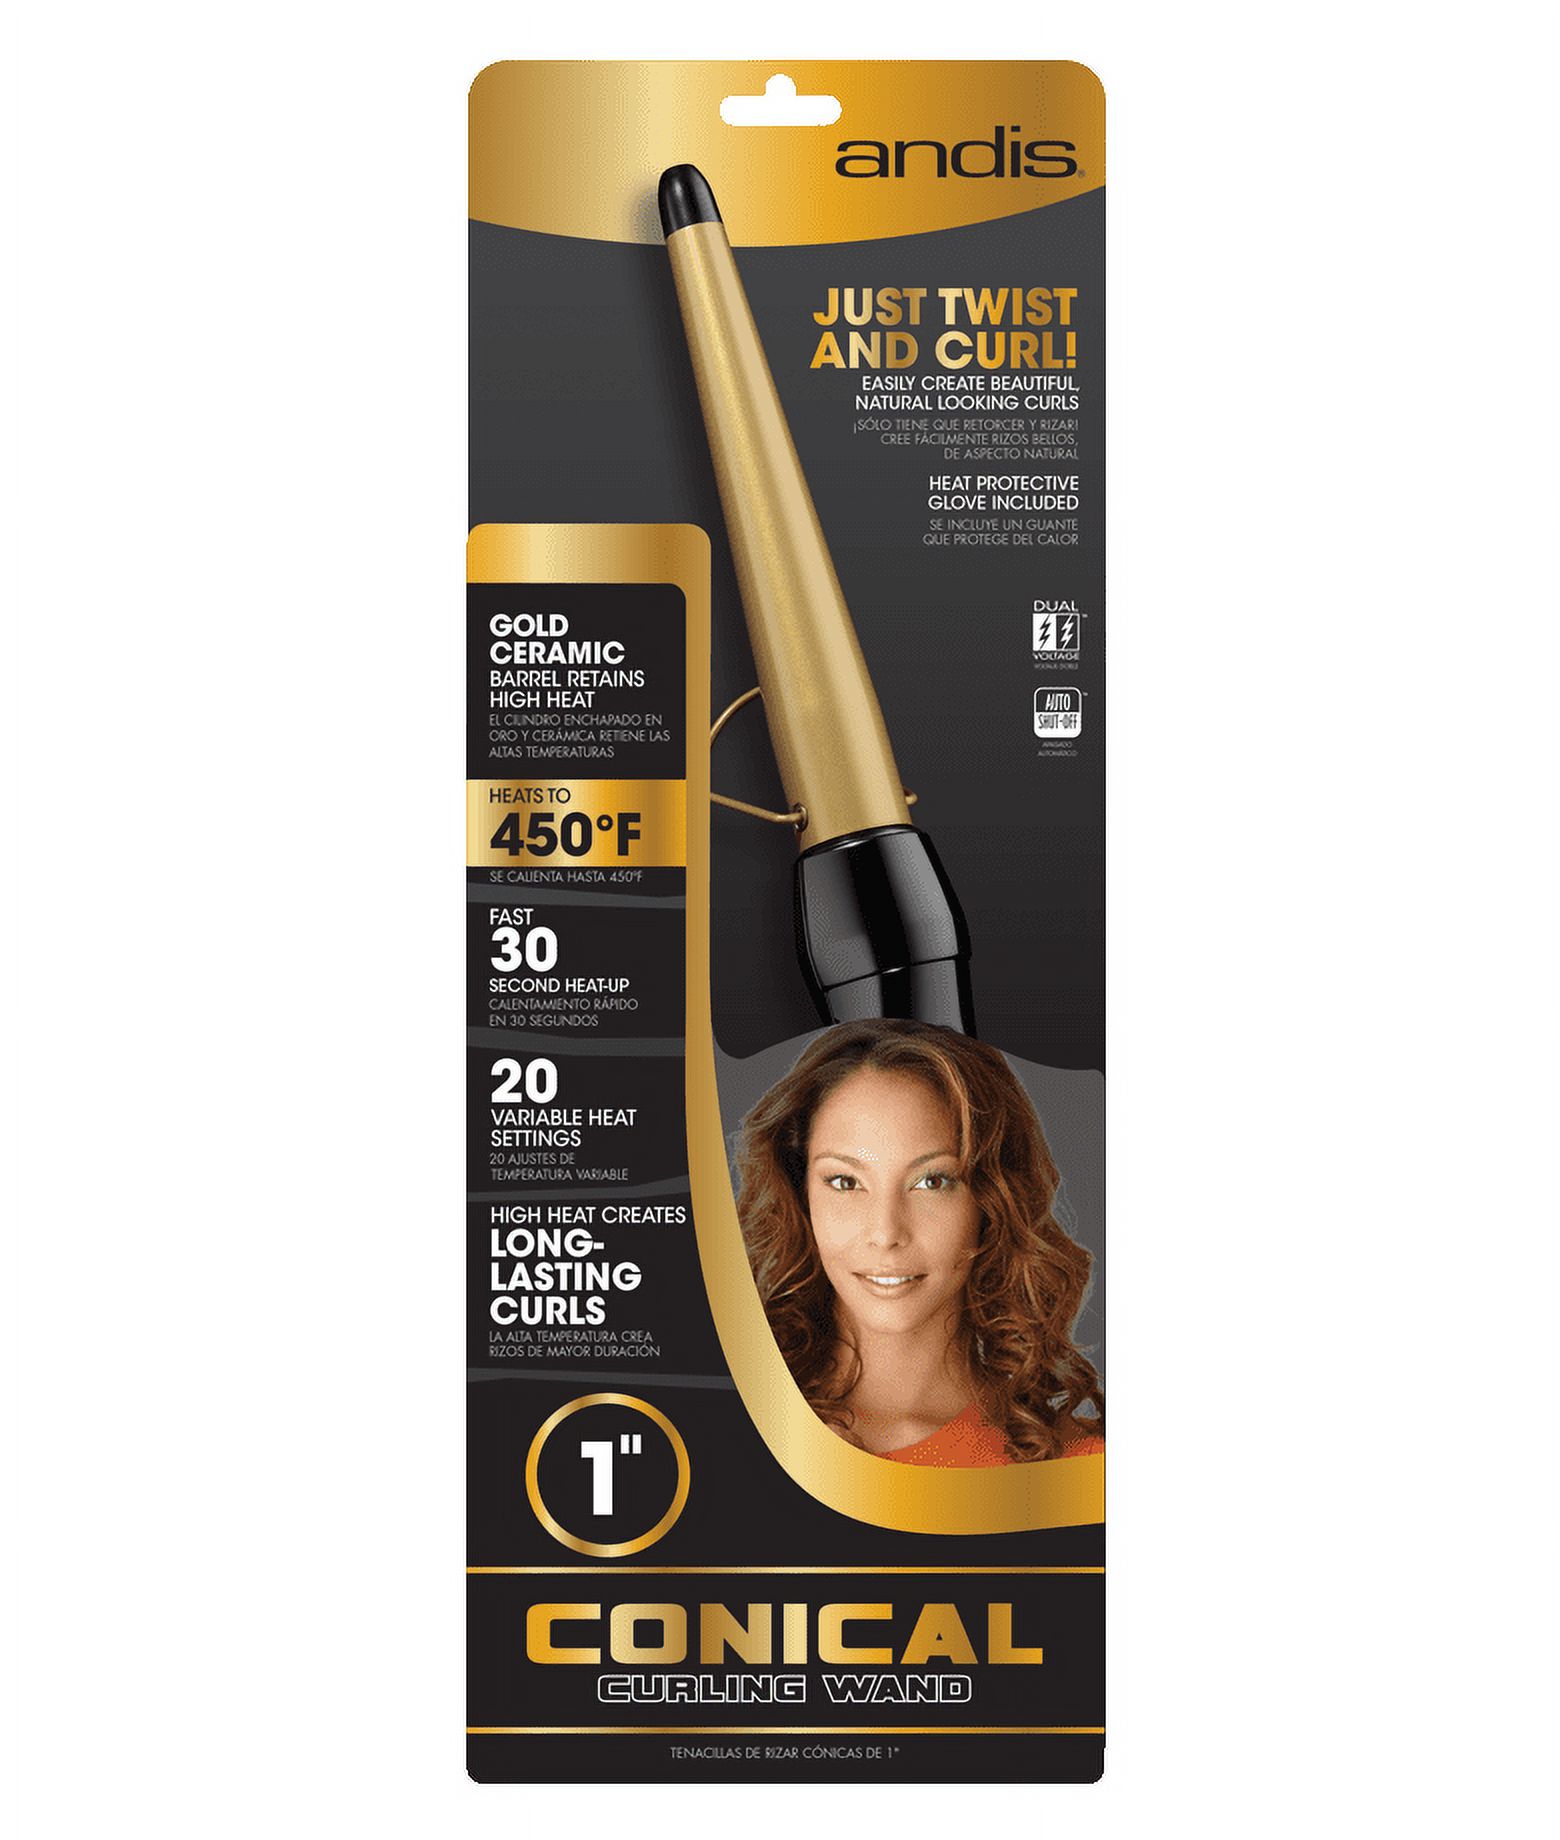 Andis High Heat Gold Ceramic Conical Curling Wand, 1-Inch - image 2 of 4